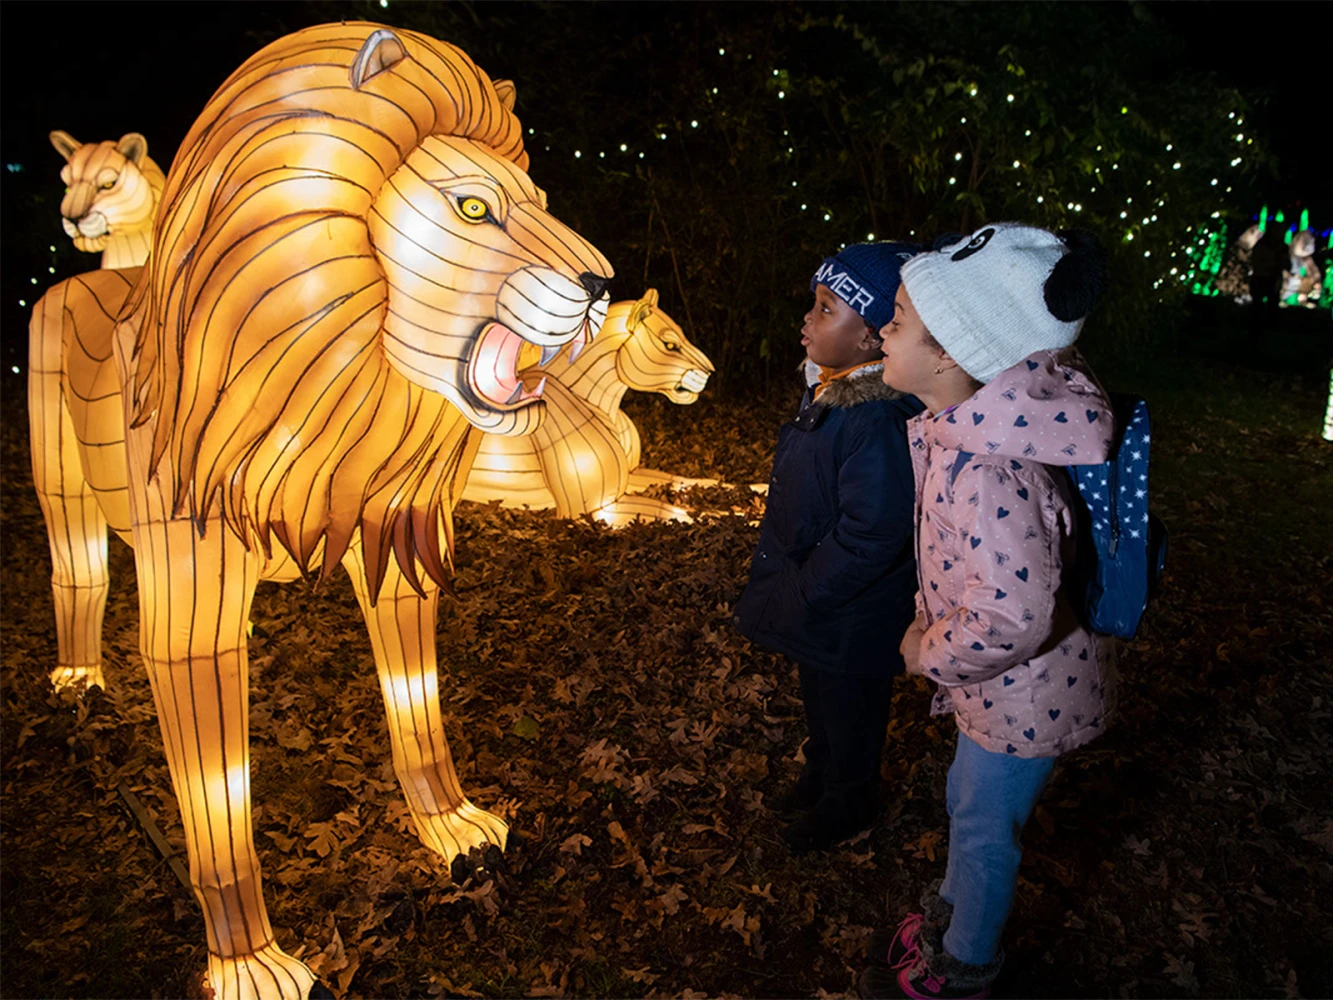 Bronx Zoo Holiday Lights: What to expect - 3